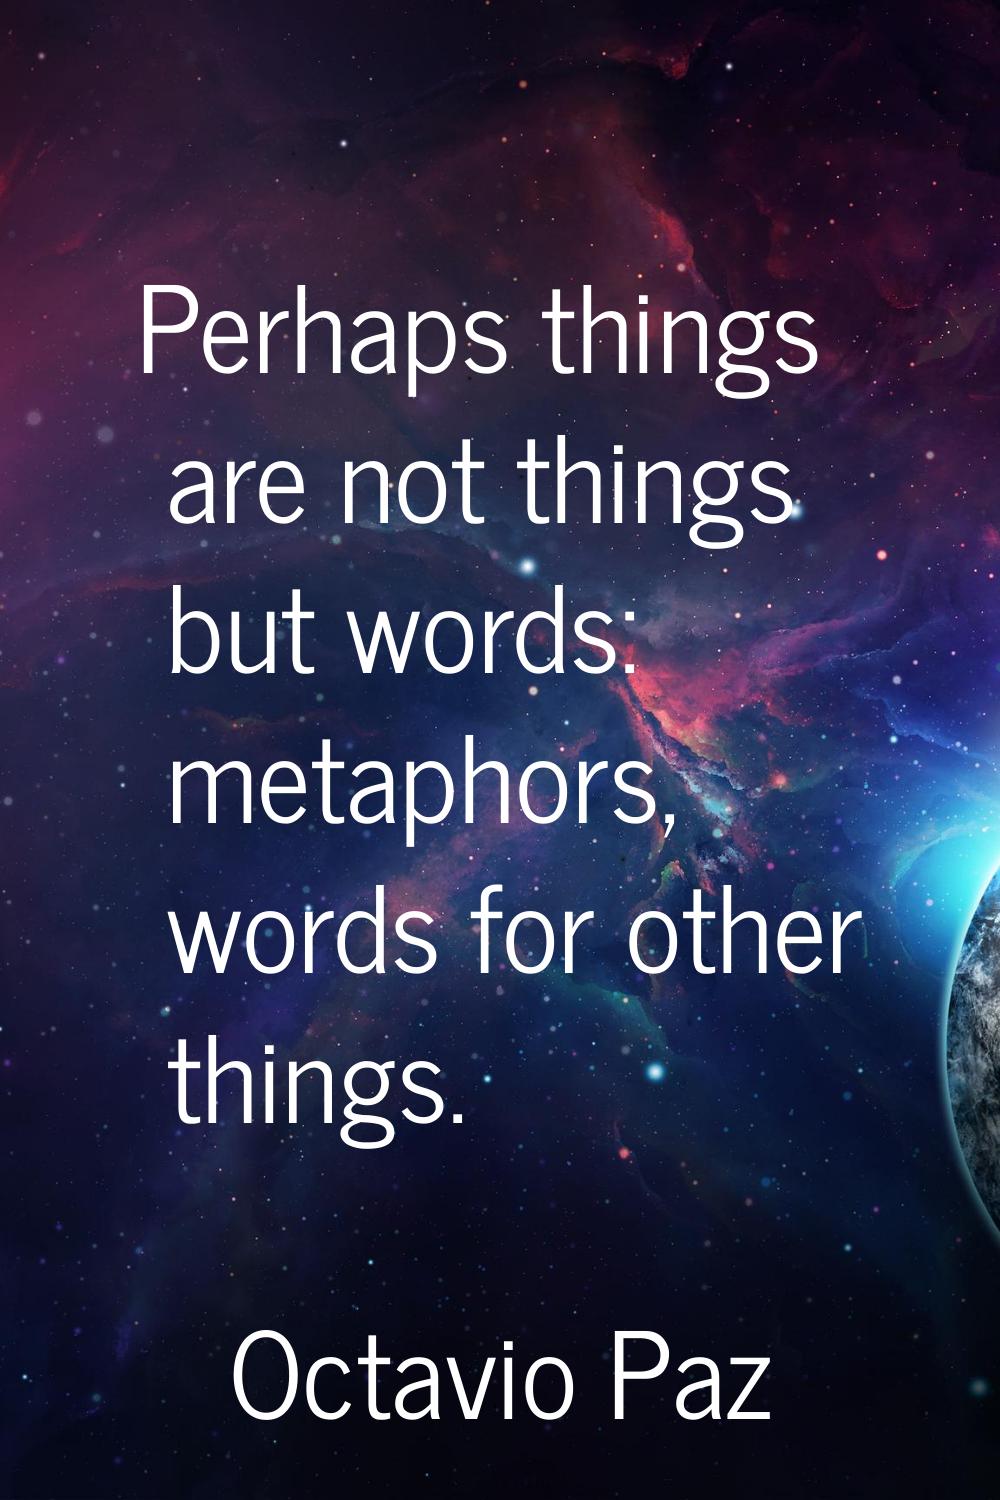 Perhaps things are not things but words: metaphors, words for other things.